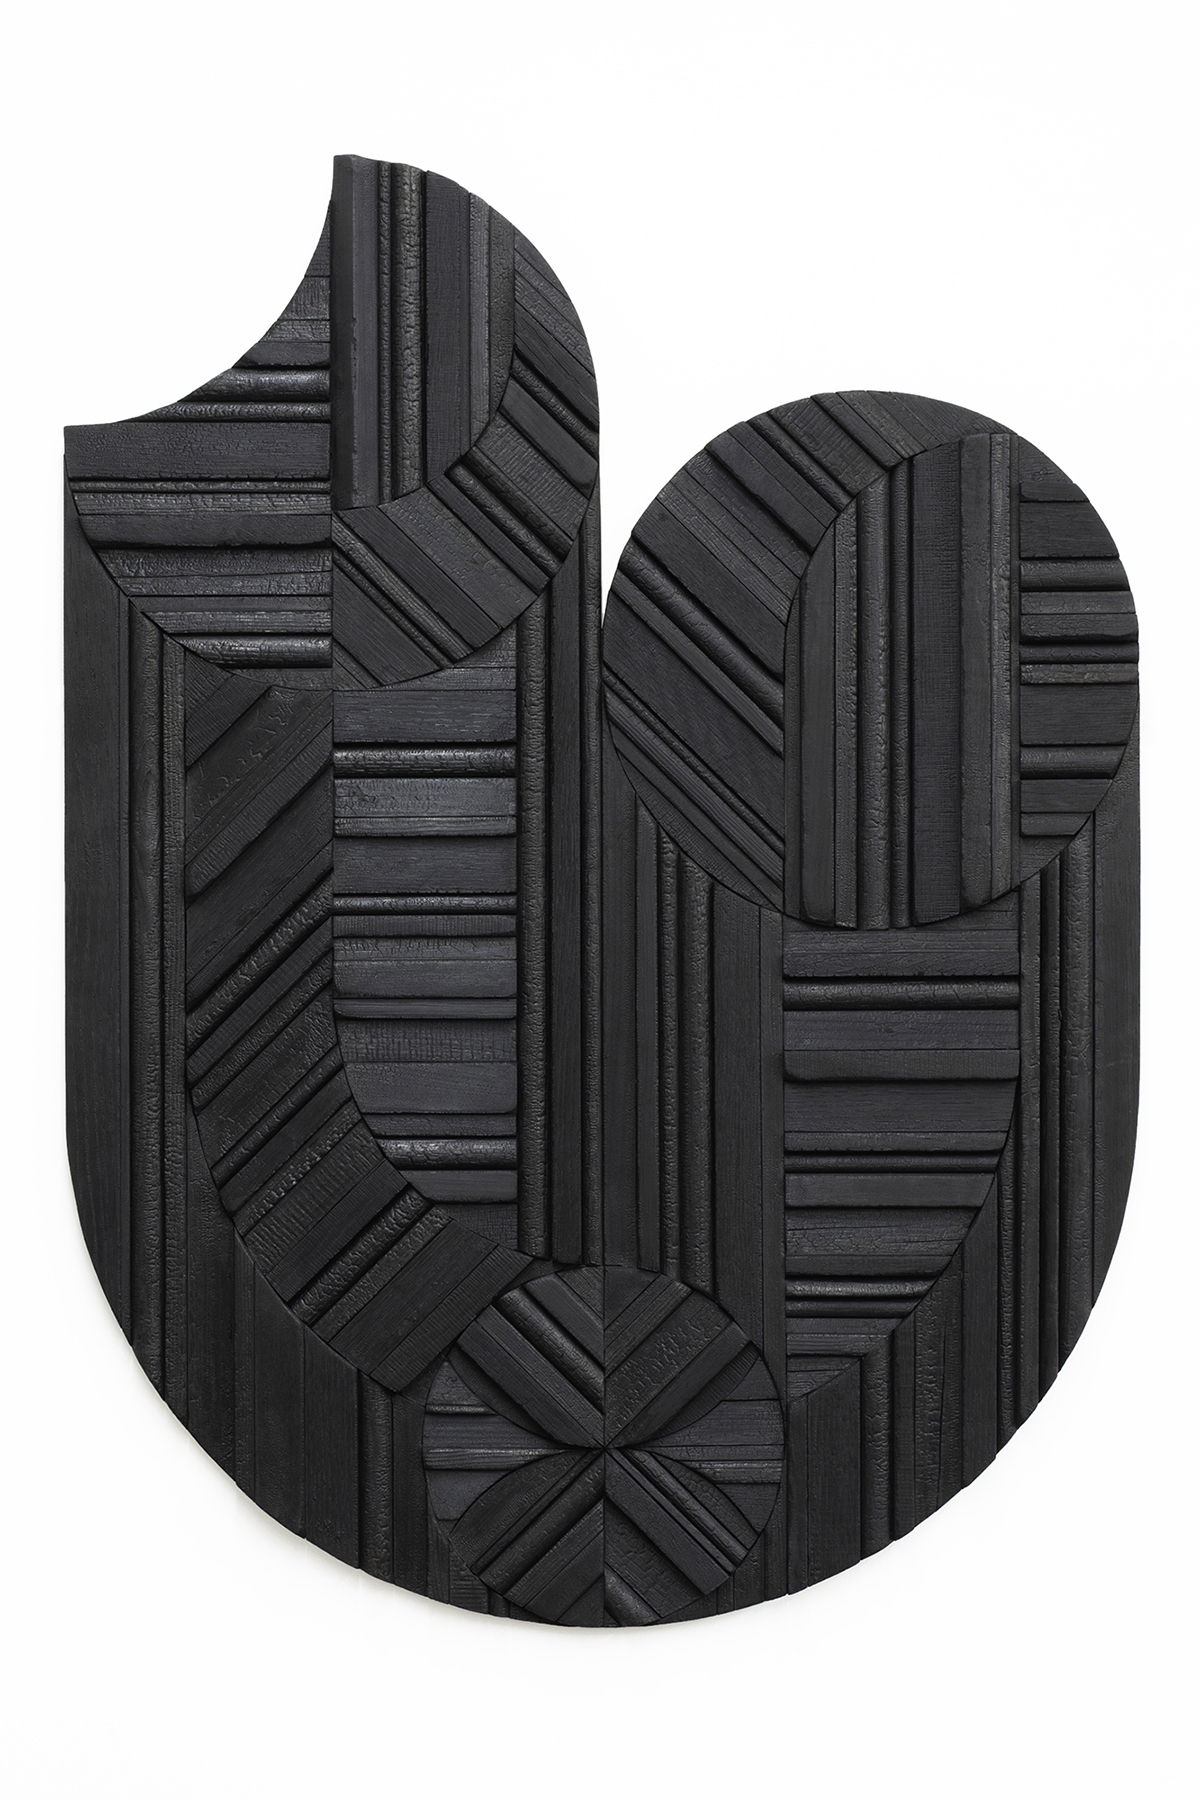 Laura Lappi's wall sculpture Umbra XVI made of charred wood